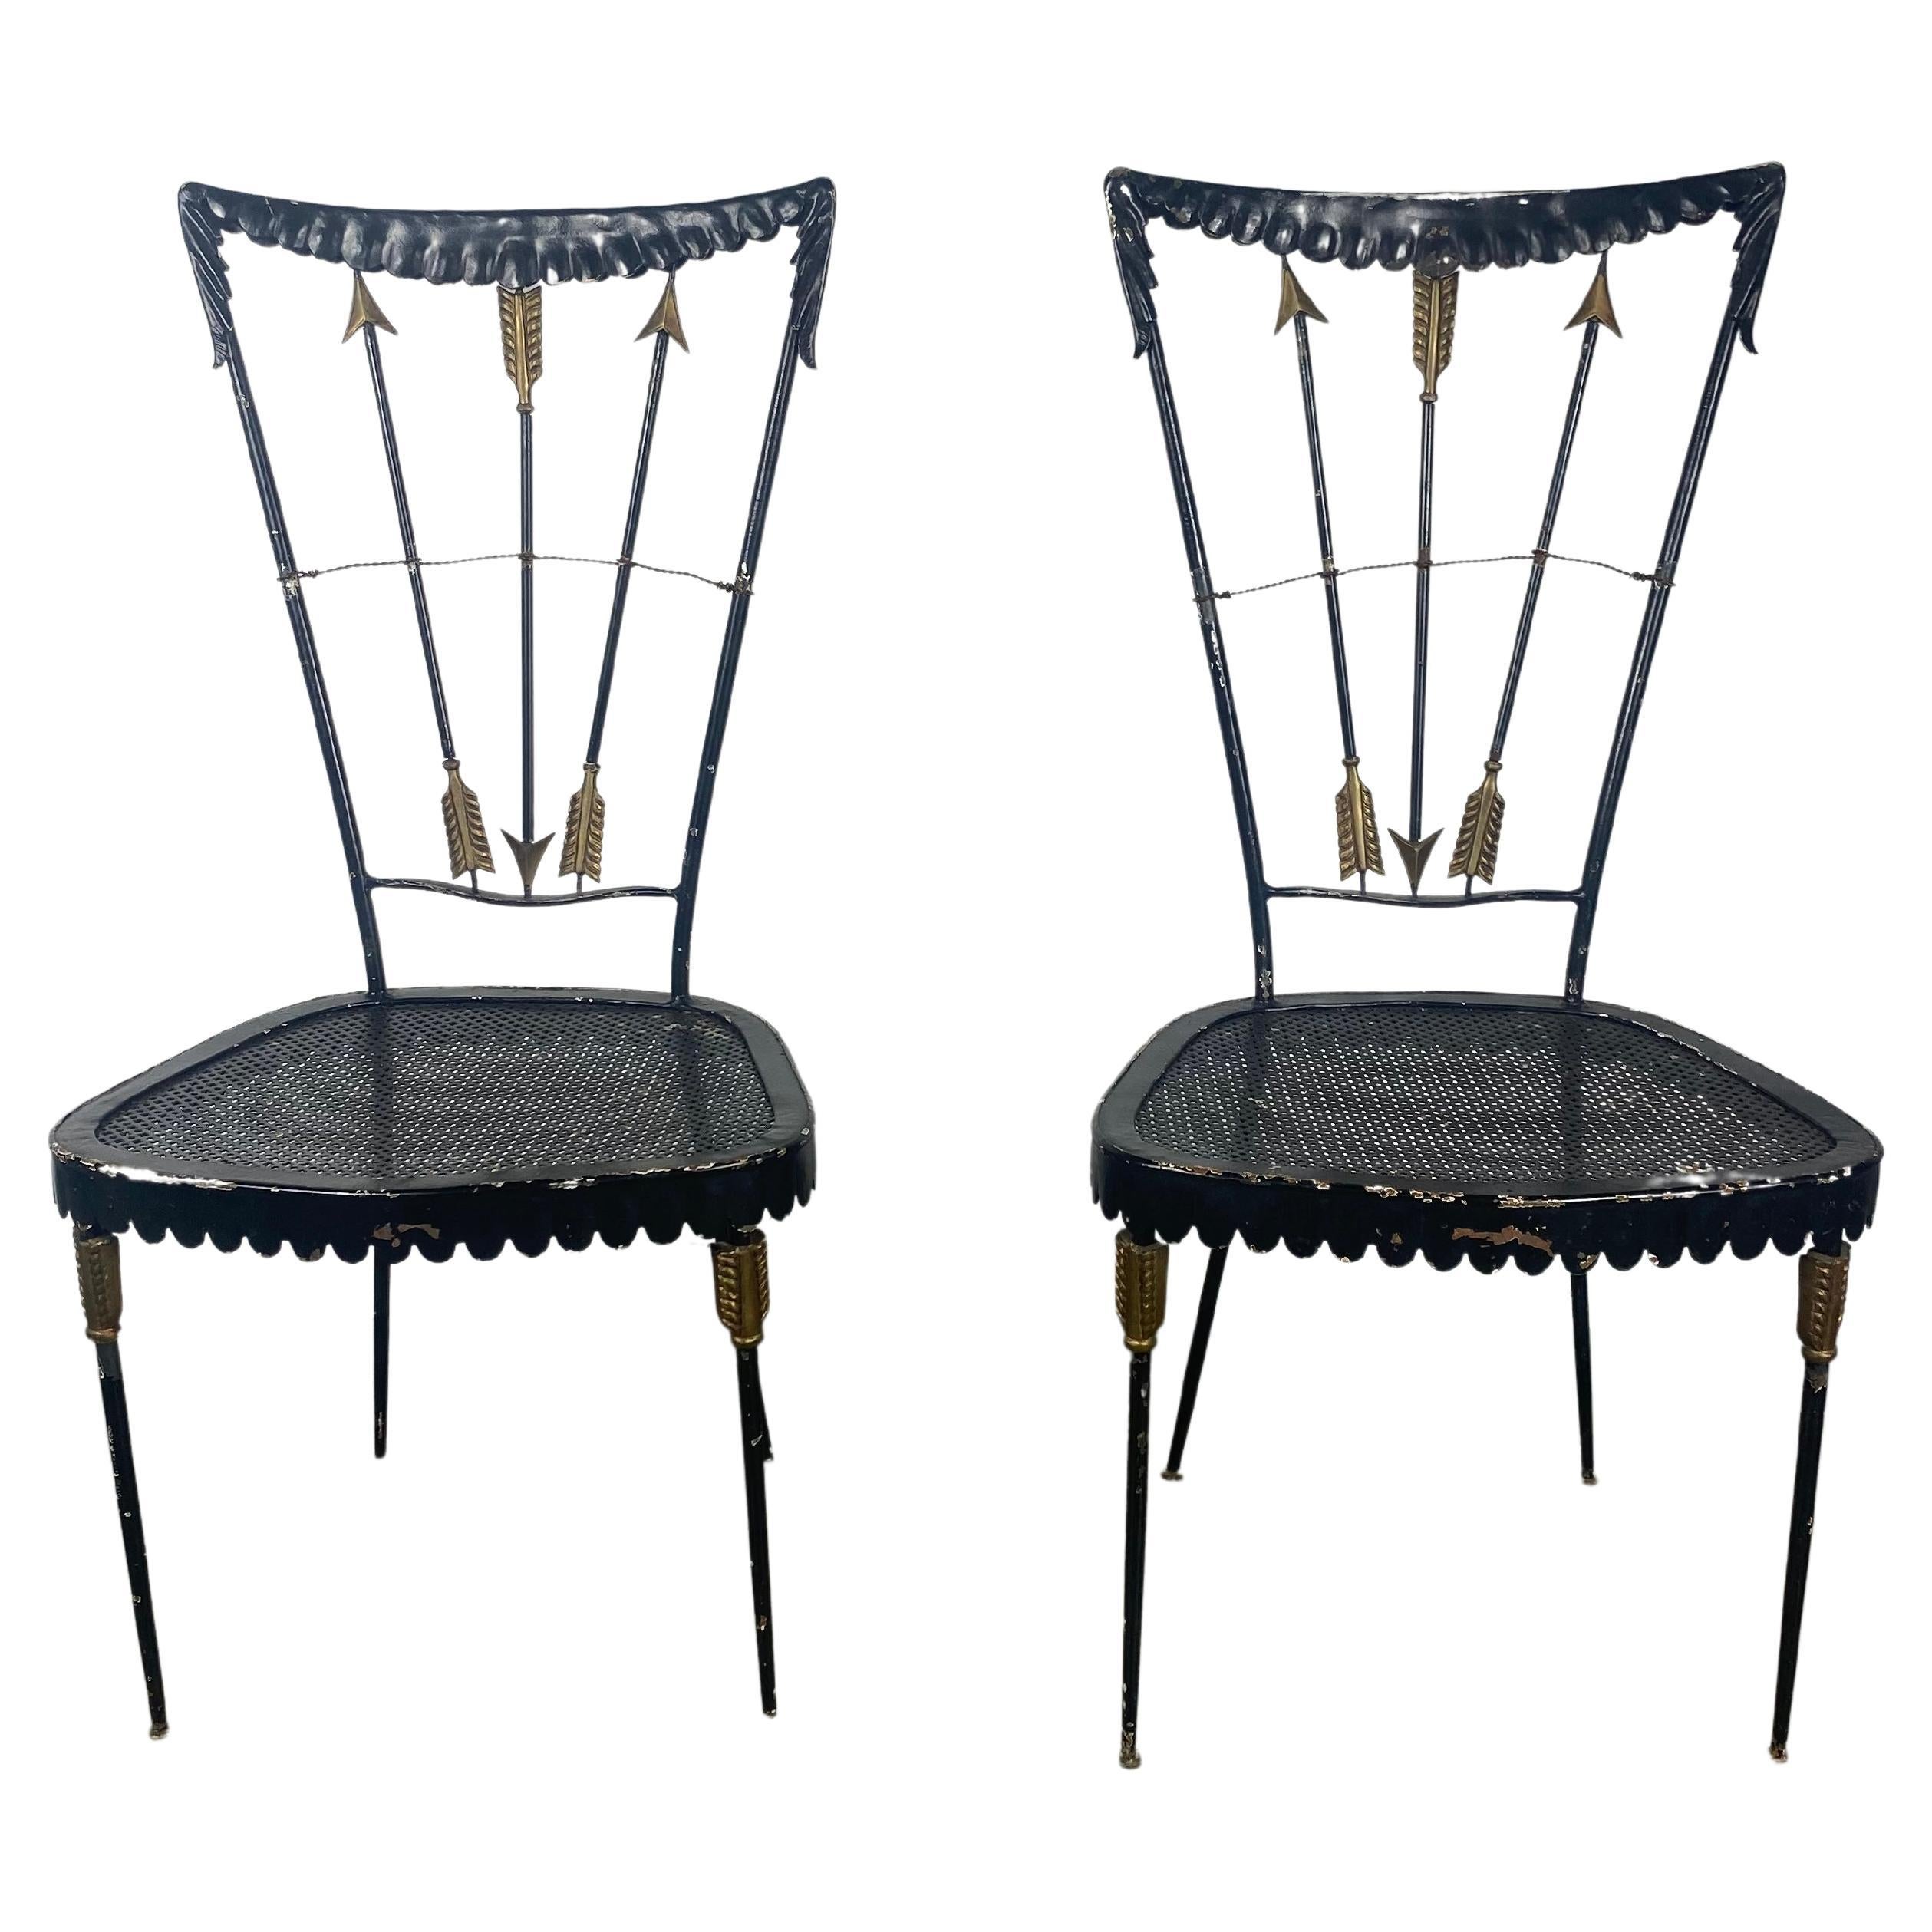 Pair of 1940's French Iron Arrow Back Side Chairs... Garden,,